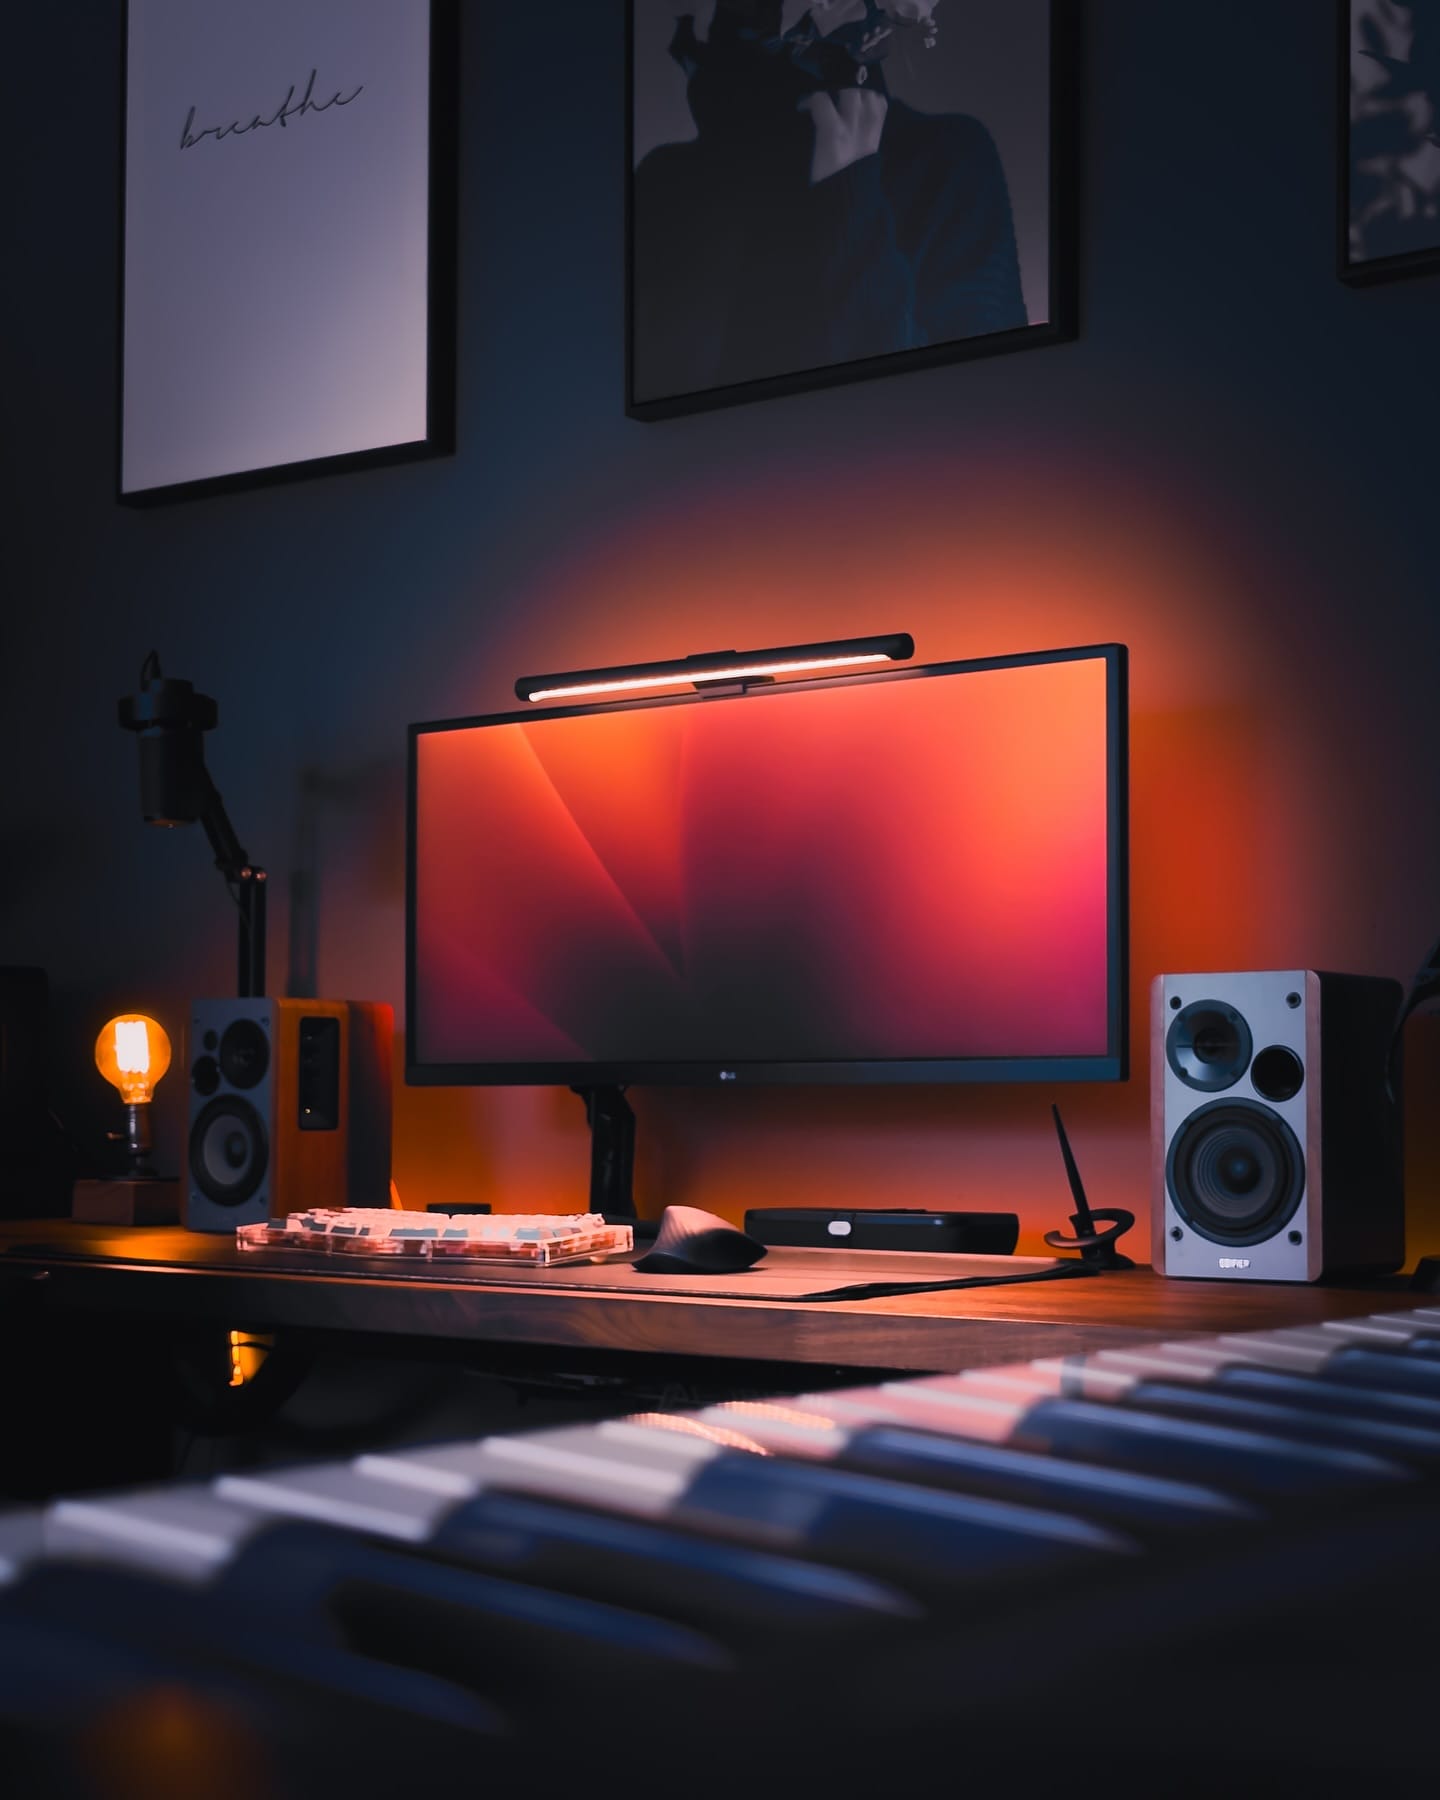 A stylish and dimly-lit workspace featuring an LG 34WK650 monitor on a Flexispot MA-8 mount, illuminated by a Xiaomi Light Bar, with a Switch Couture Frosted Acrylic Alice keyboard, Logitech MX Master 3 mouse, and Edifier R1280T speakers